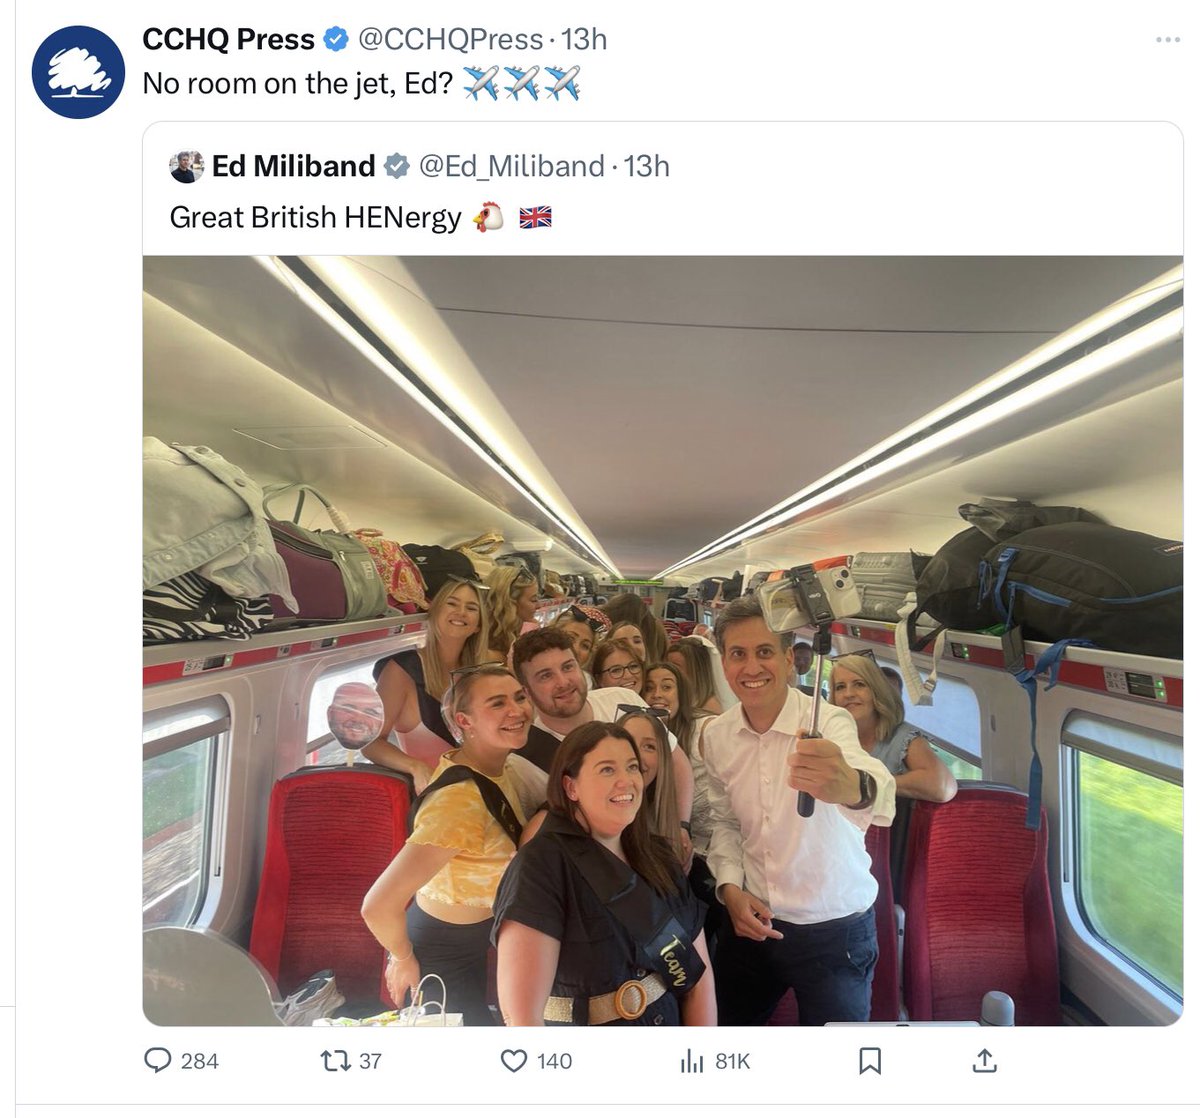 Seriously?  They’re now mocking people who travel by train?